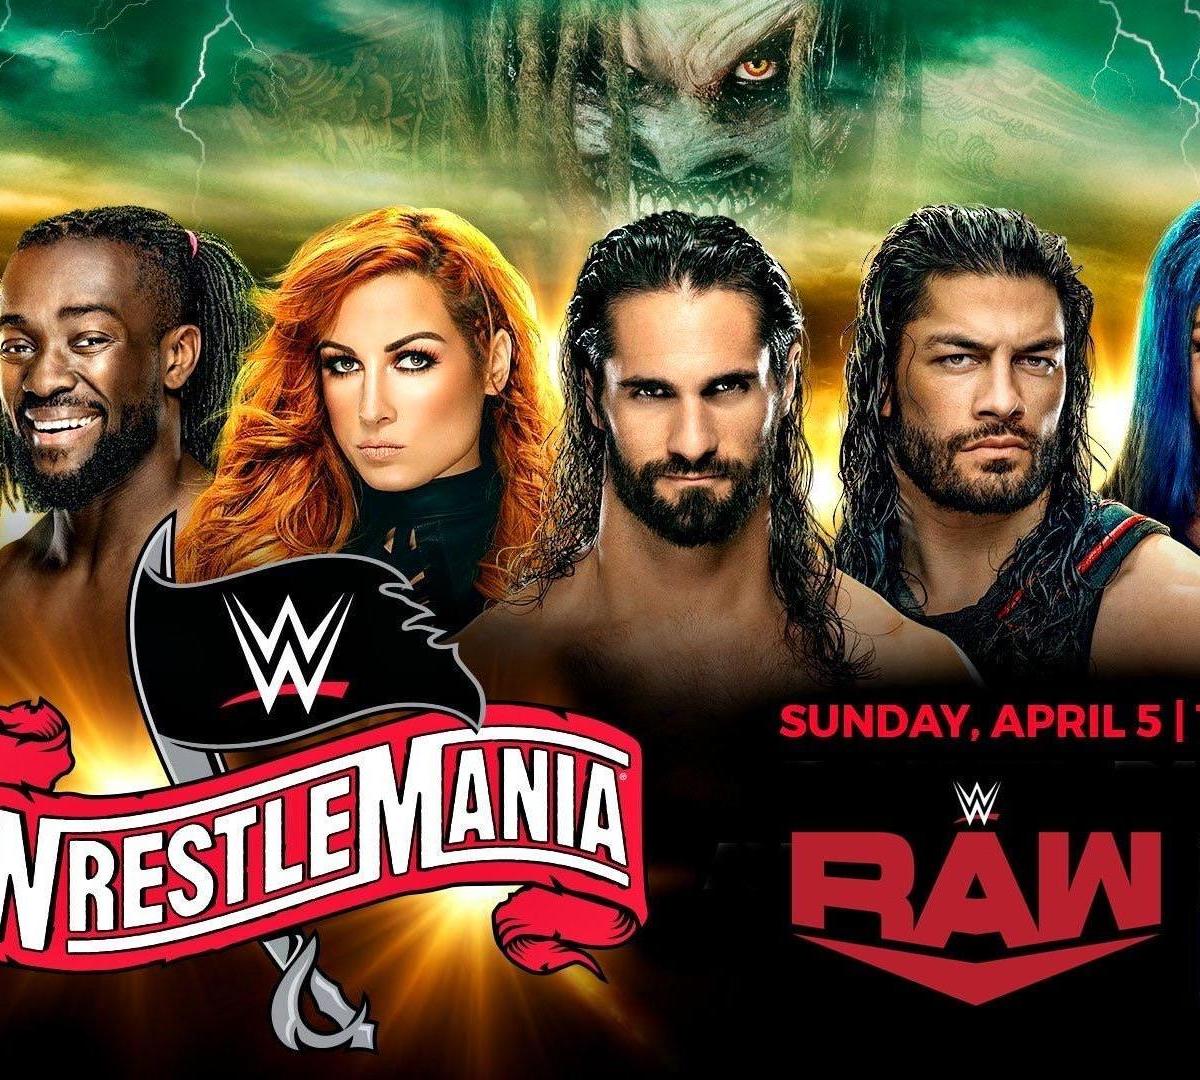 Who Is the Current Face of WWE Heading into WrestleMania 36? News